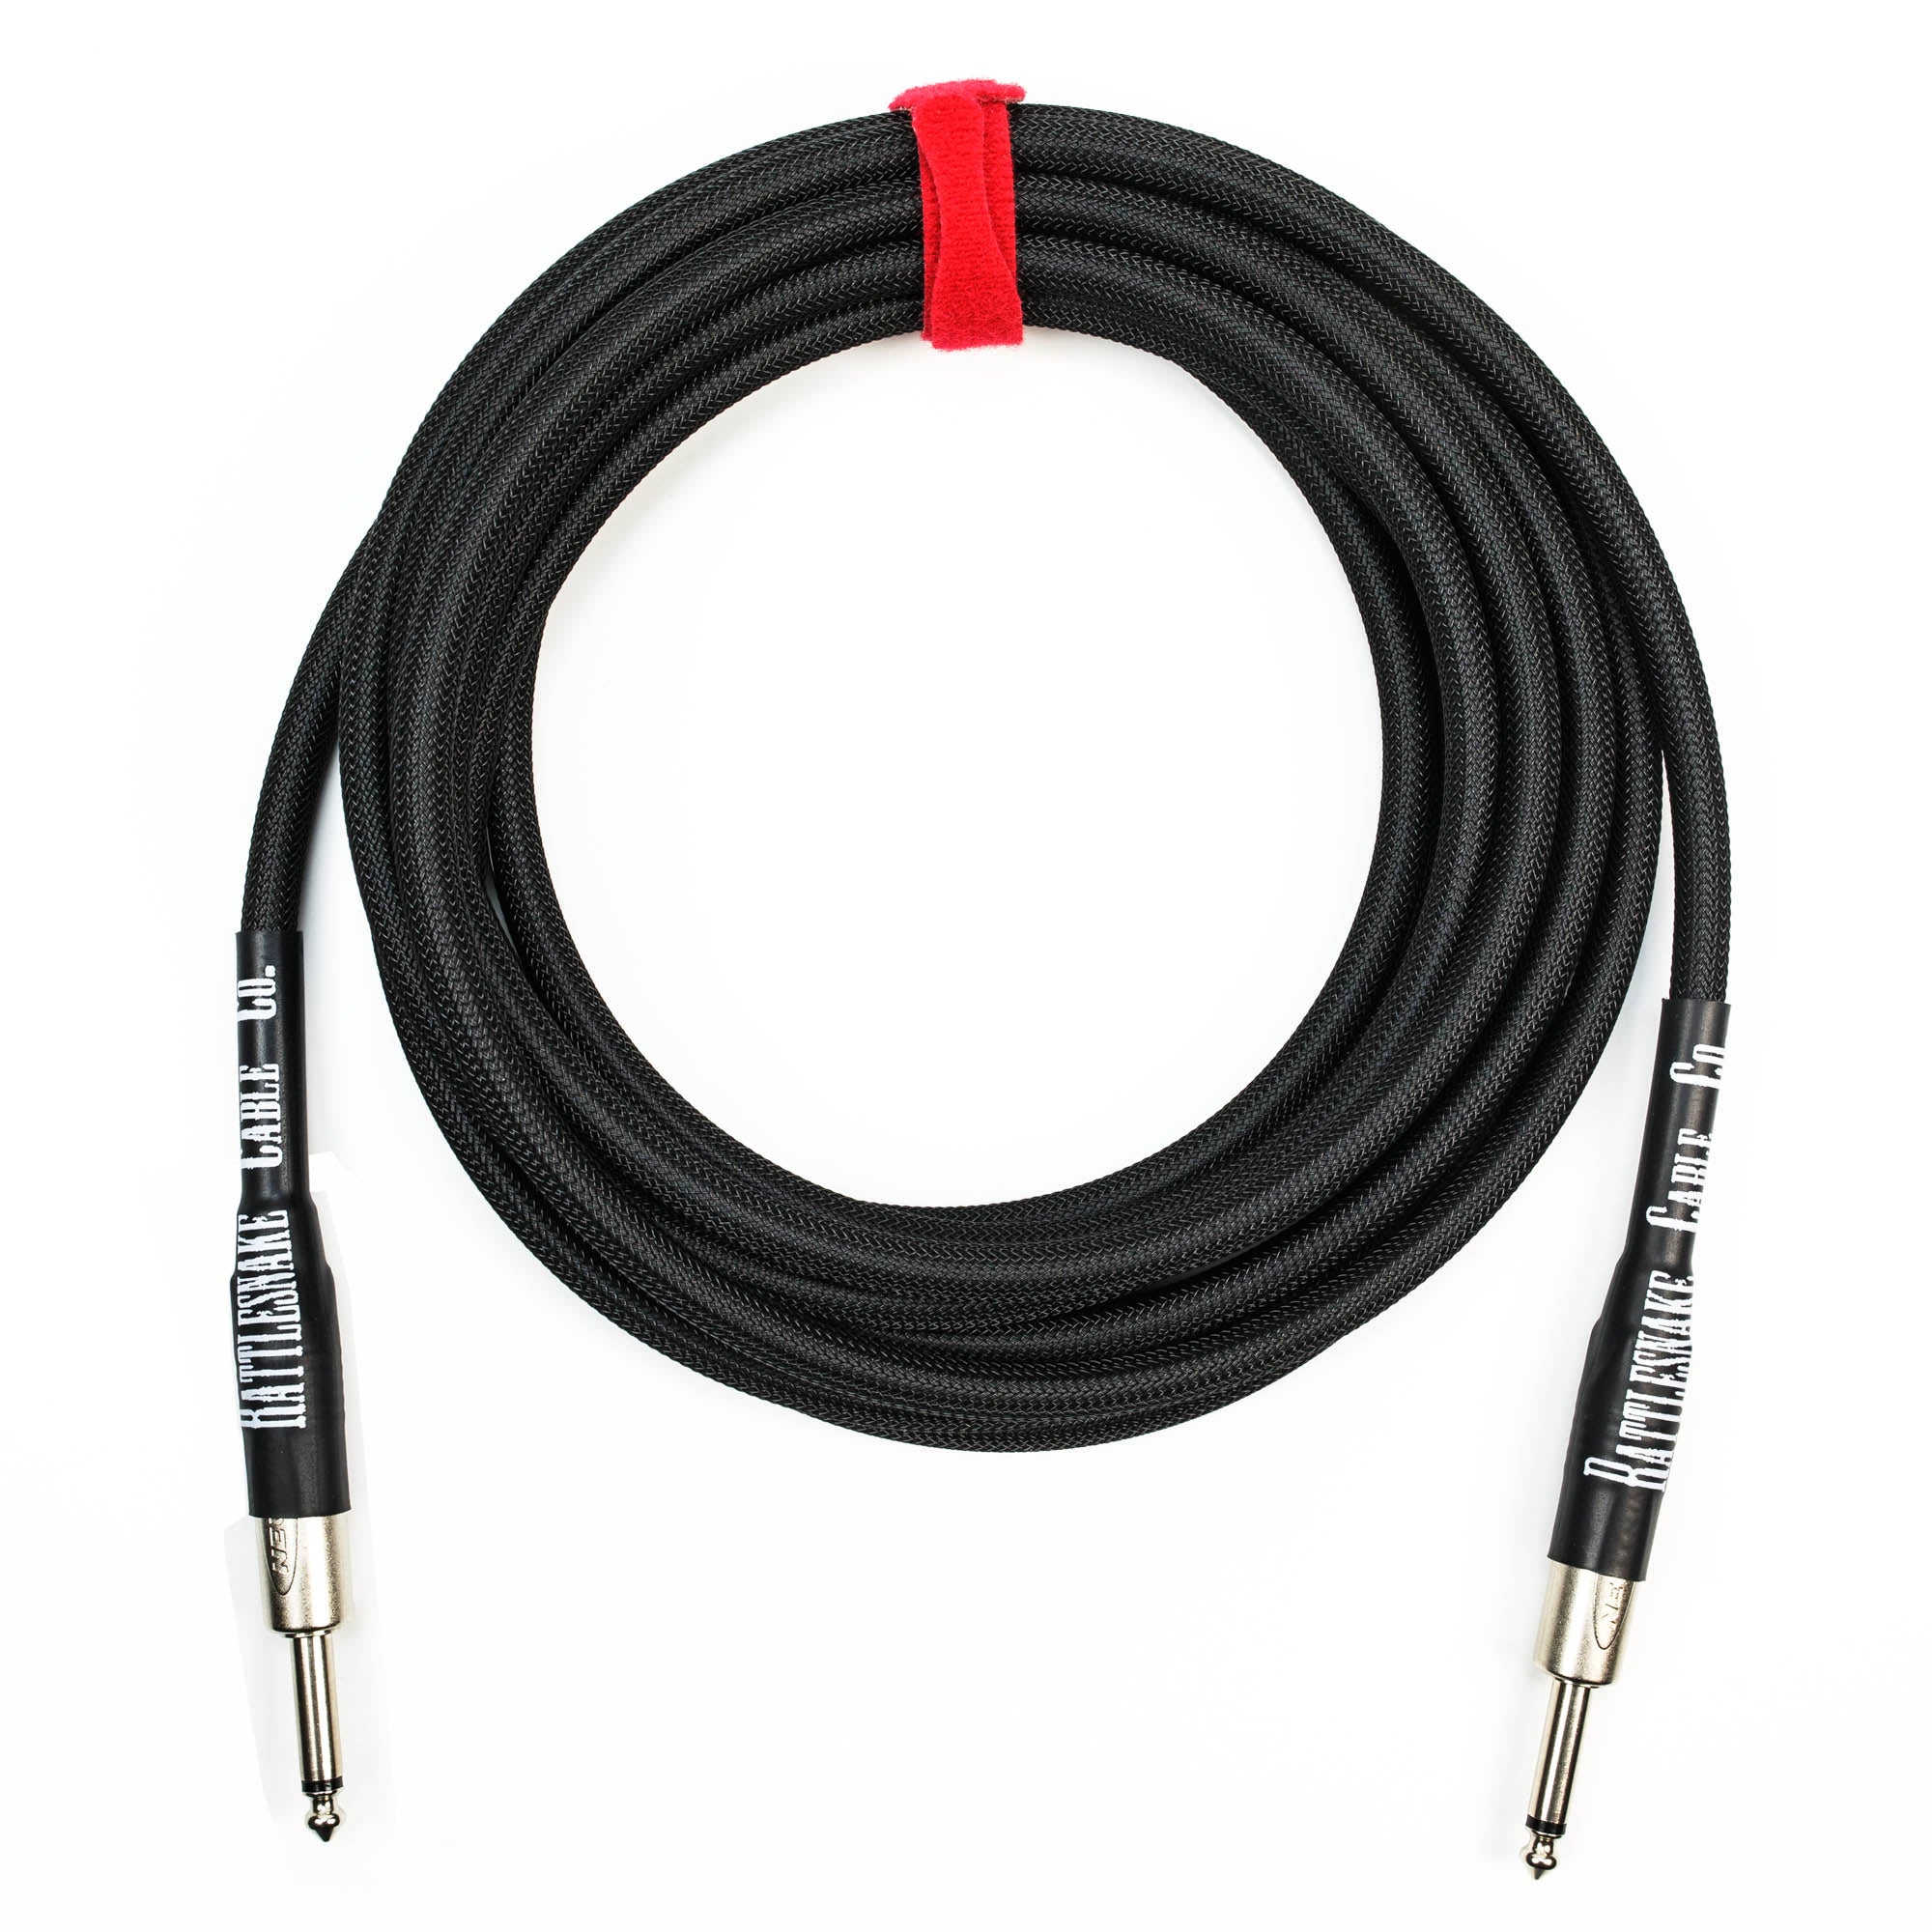 Rattlesnake Cable Company 15' Black Guitar Cable - Straight Plugs